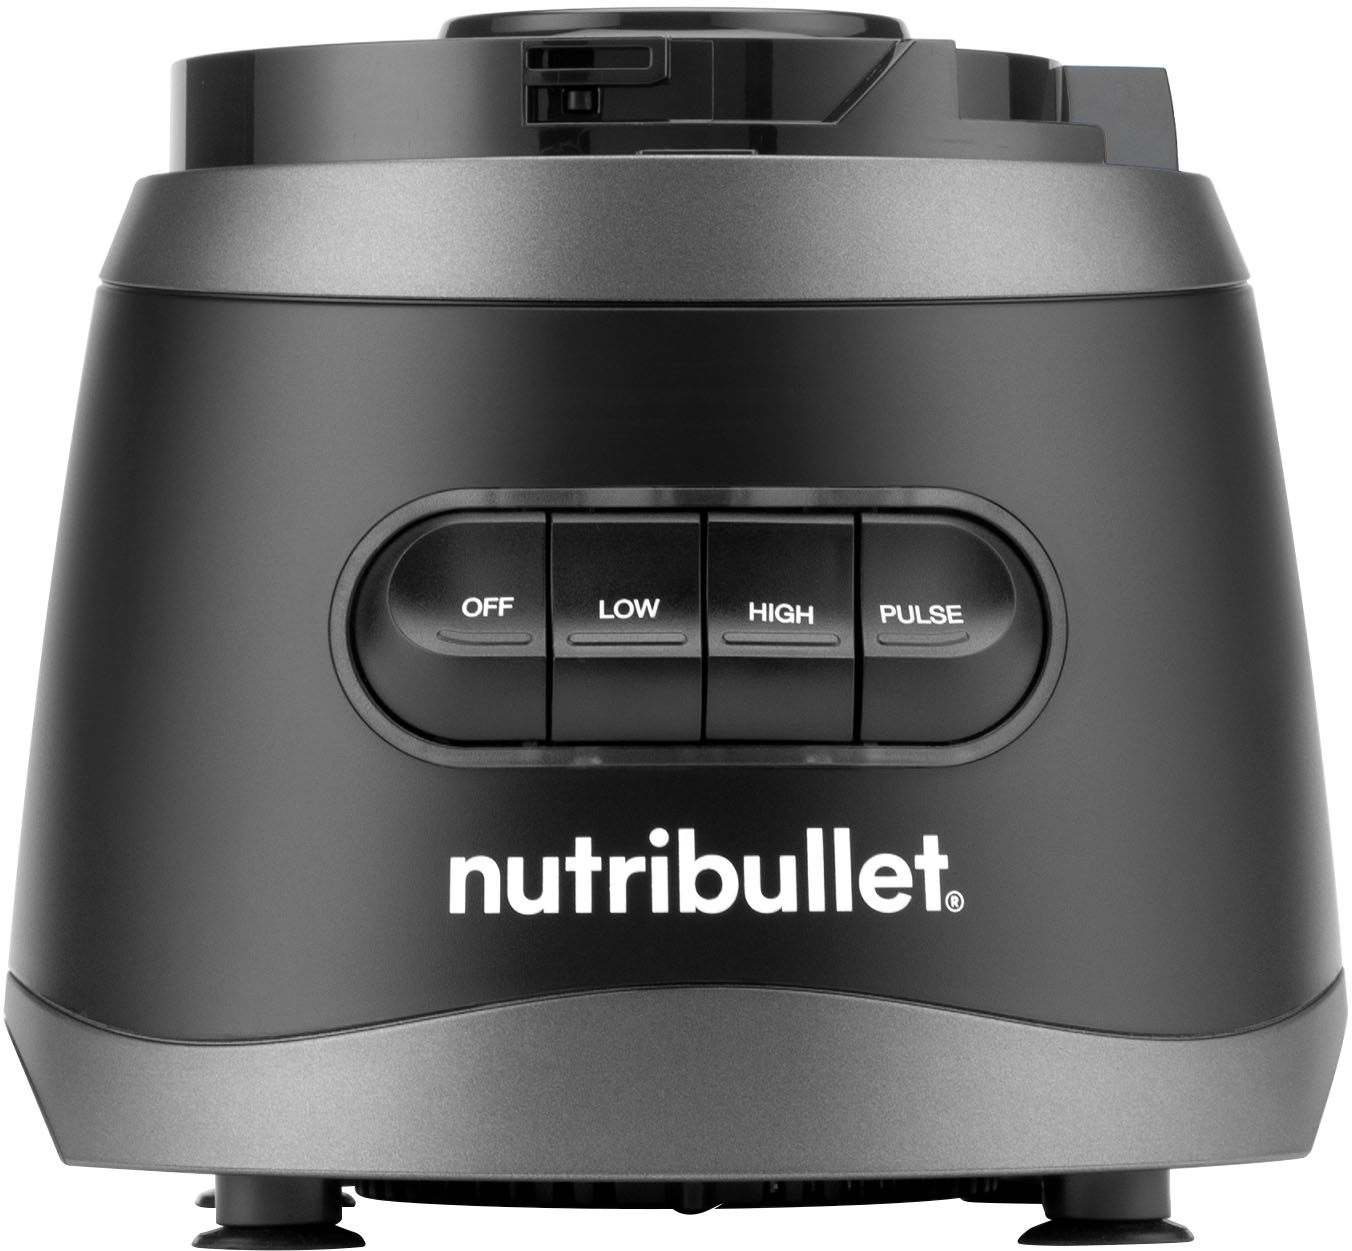 nutribullet® 7-Cup Food Processor: your spin on meal prep.